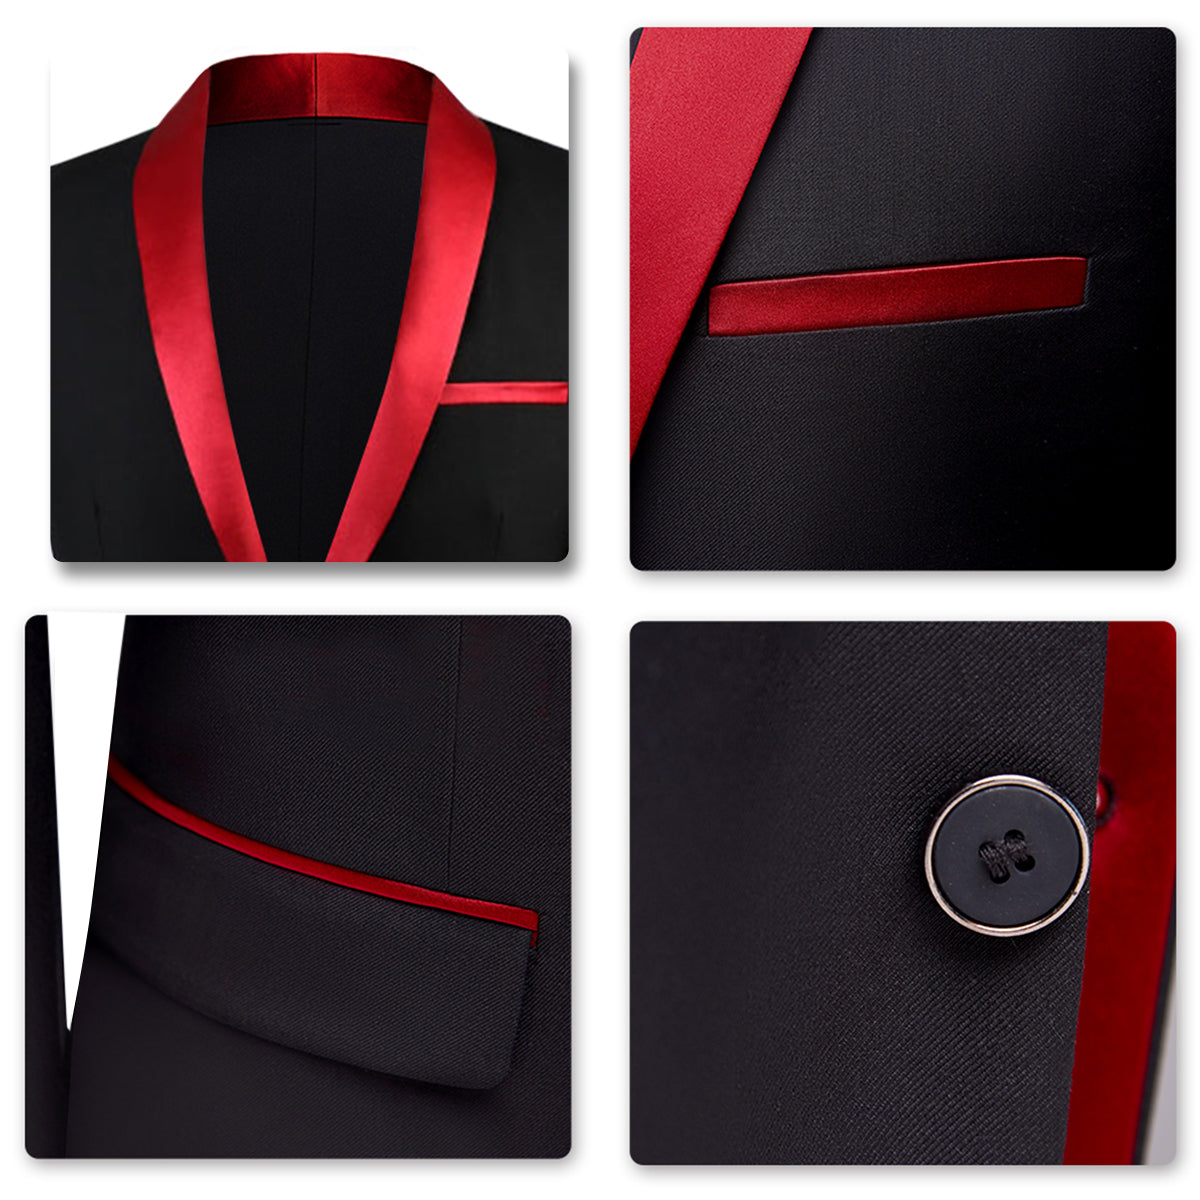 3-Piece Men's Shawl Collar Contrasting Color Dress Suit Red